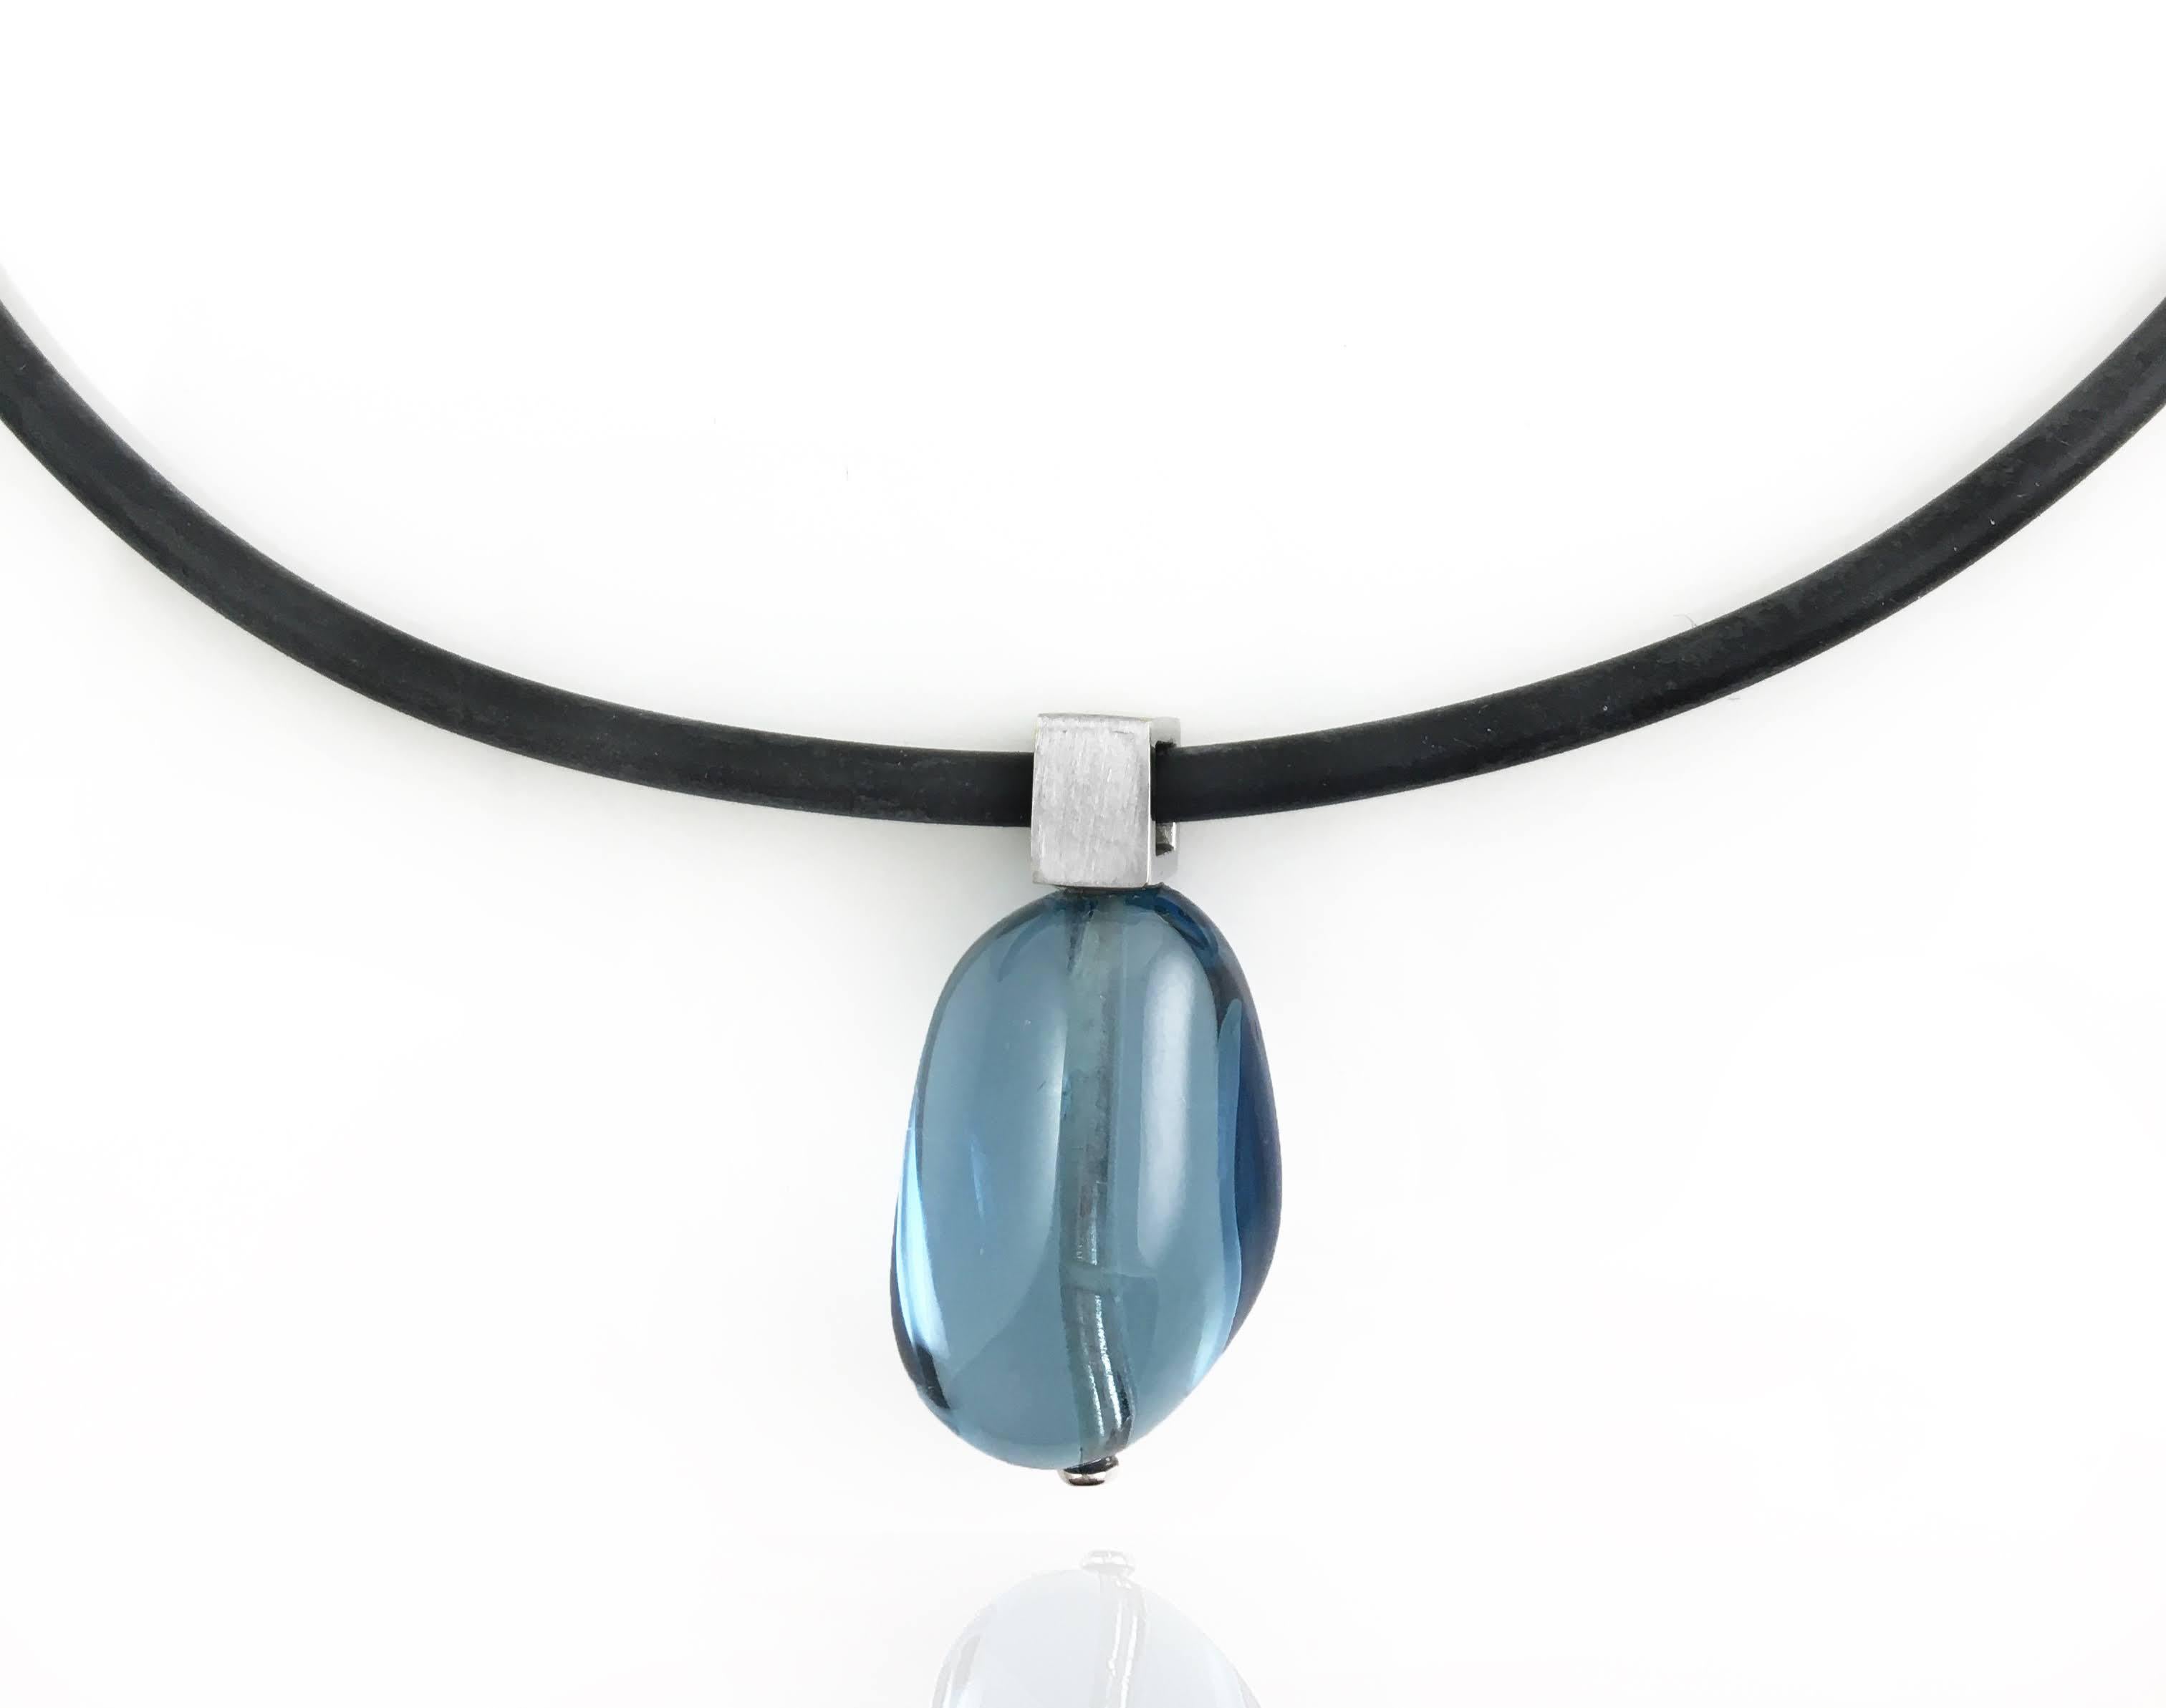 One of a kind. Stunning White Gold Bail with Blue Topaz Pendant on Rubber Cord. The smooth organic drop bead looks like water. The 14 karat white gold bail is 7mm square with a brushed finish. The pendant hangs from a 3mm black rubber cord with a